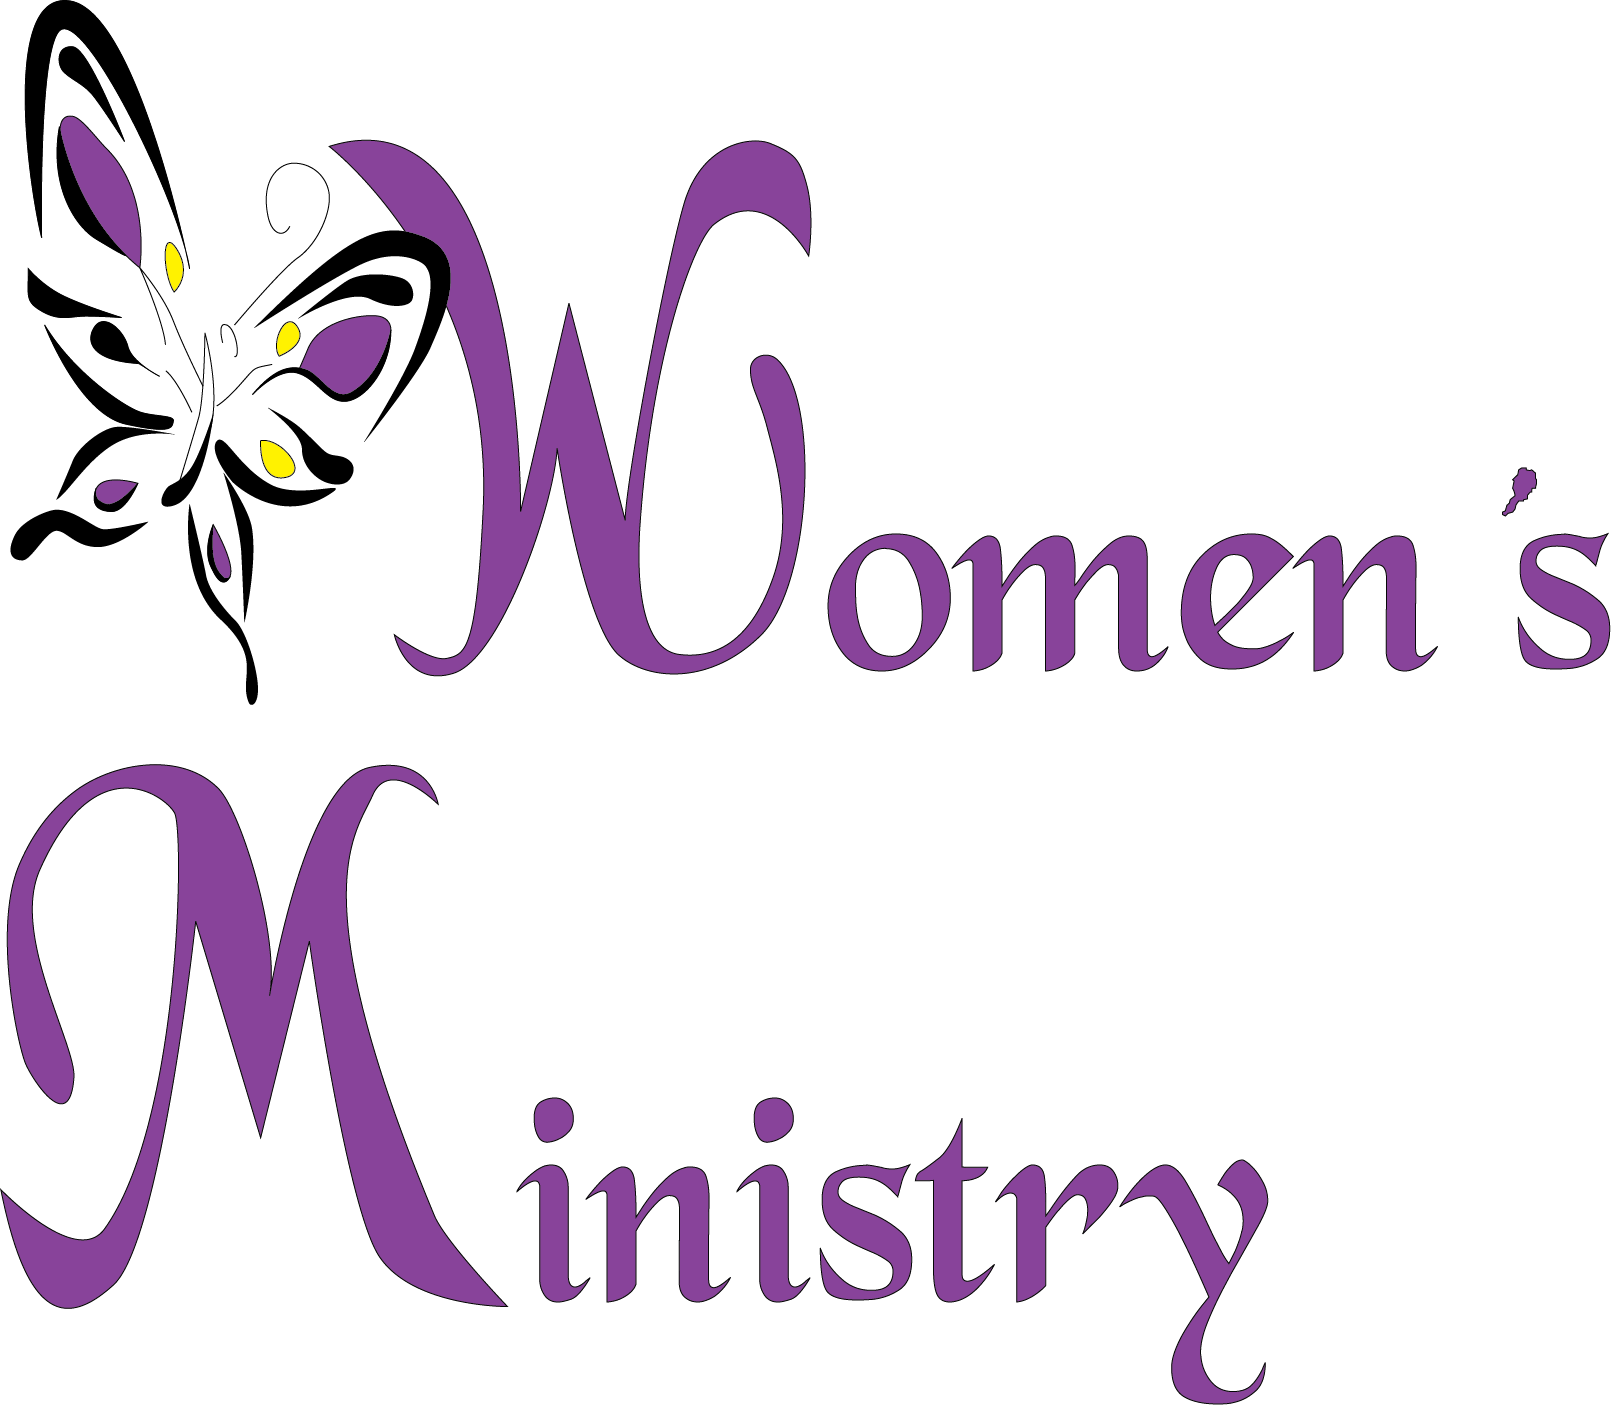 Conference clipart women's meeting, Conference women's meeting